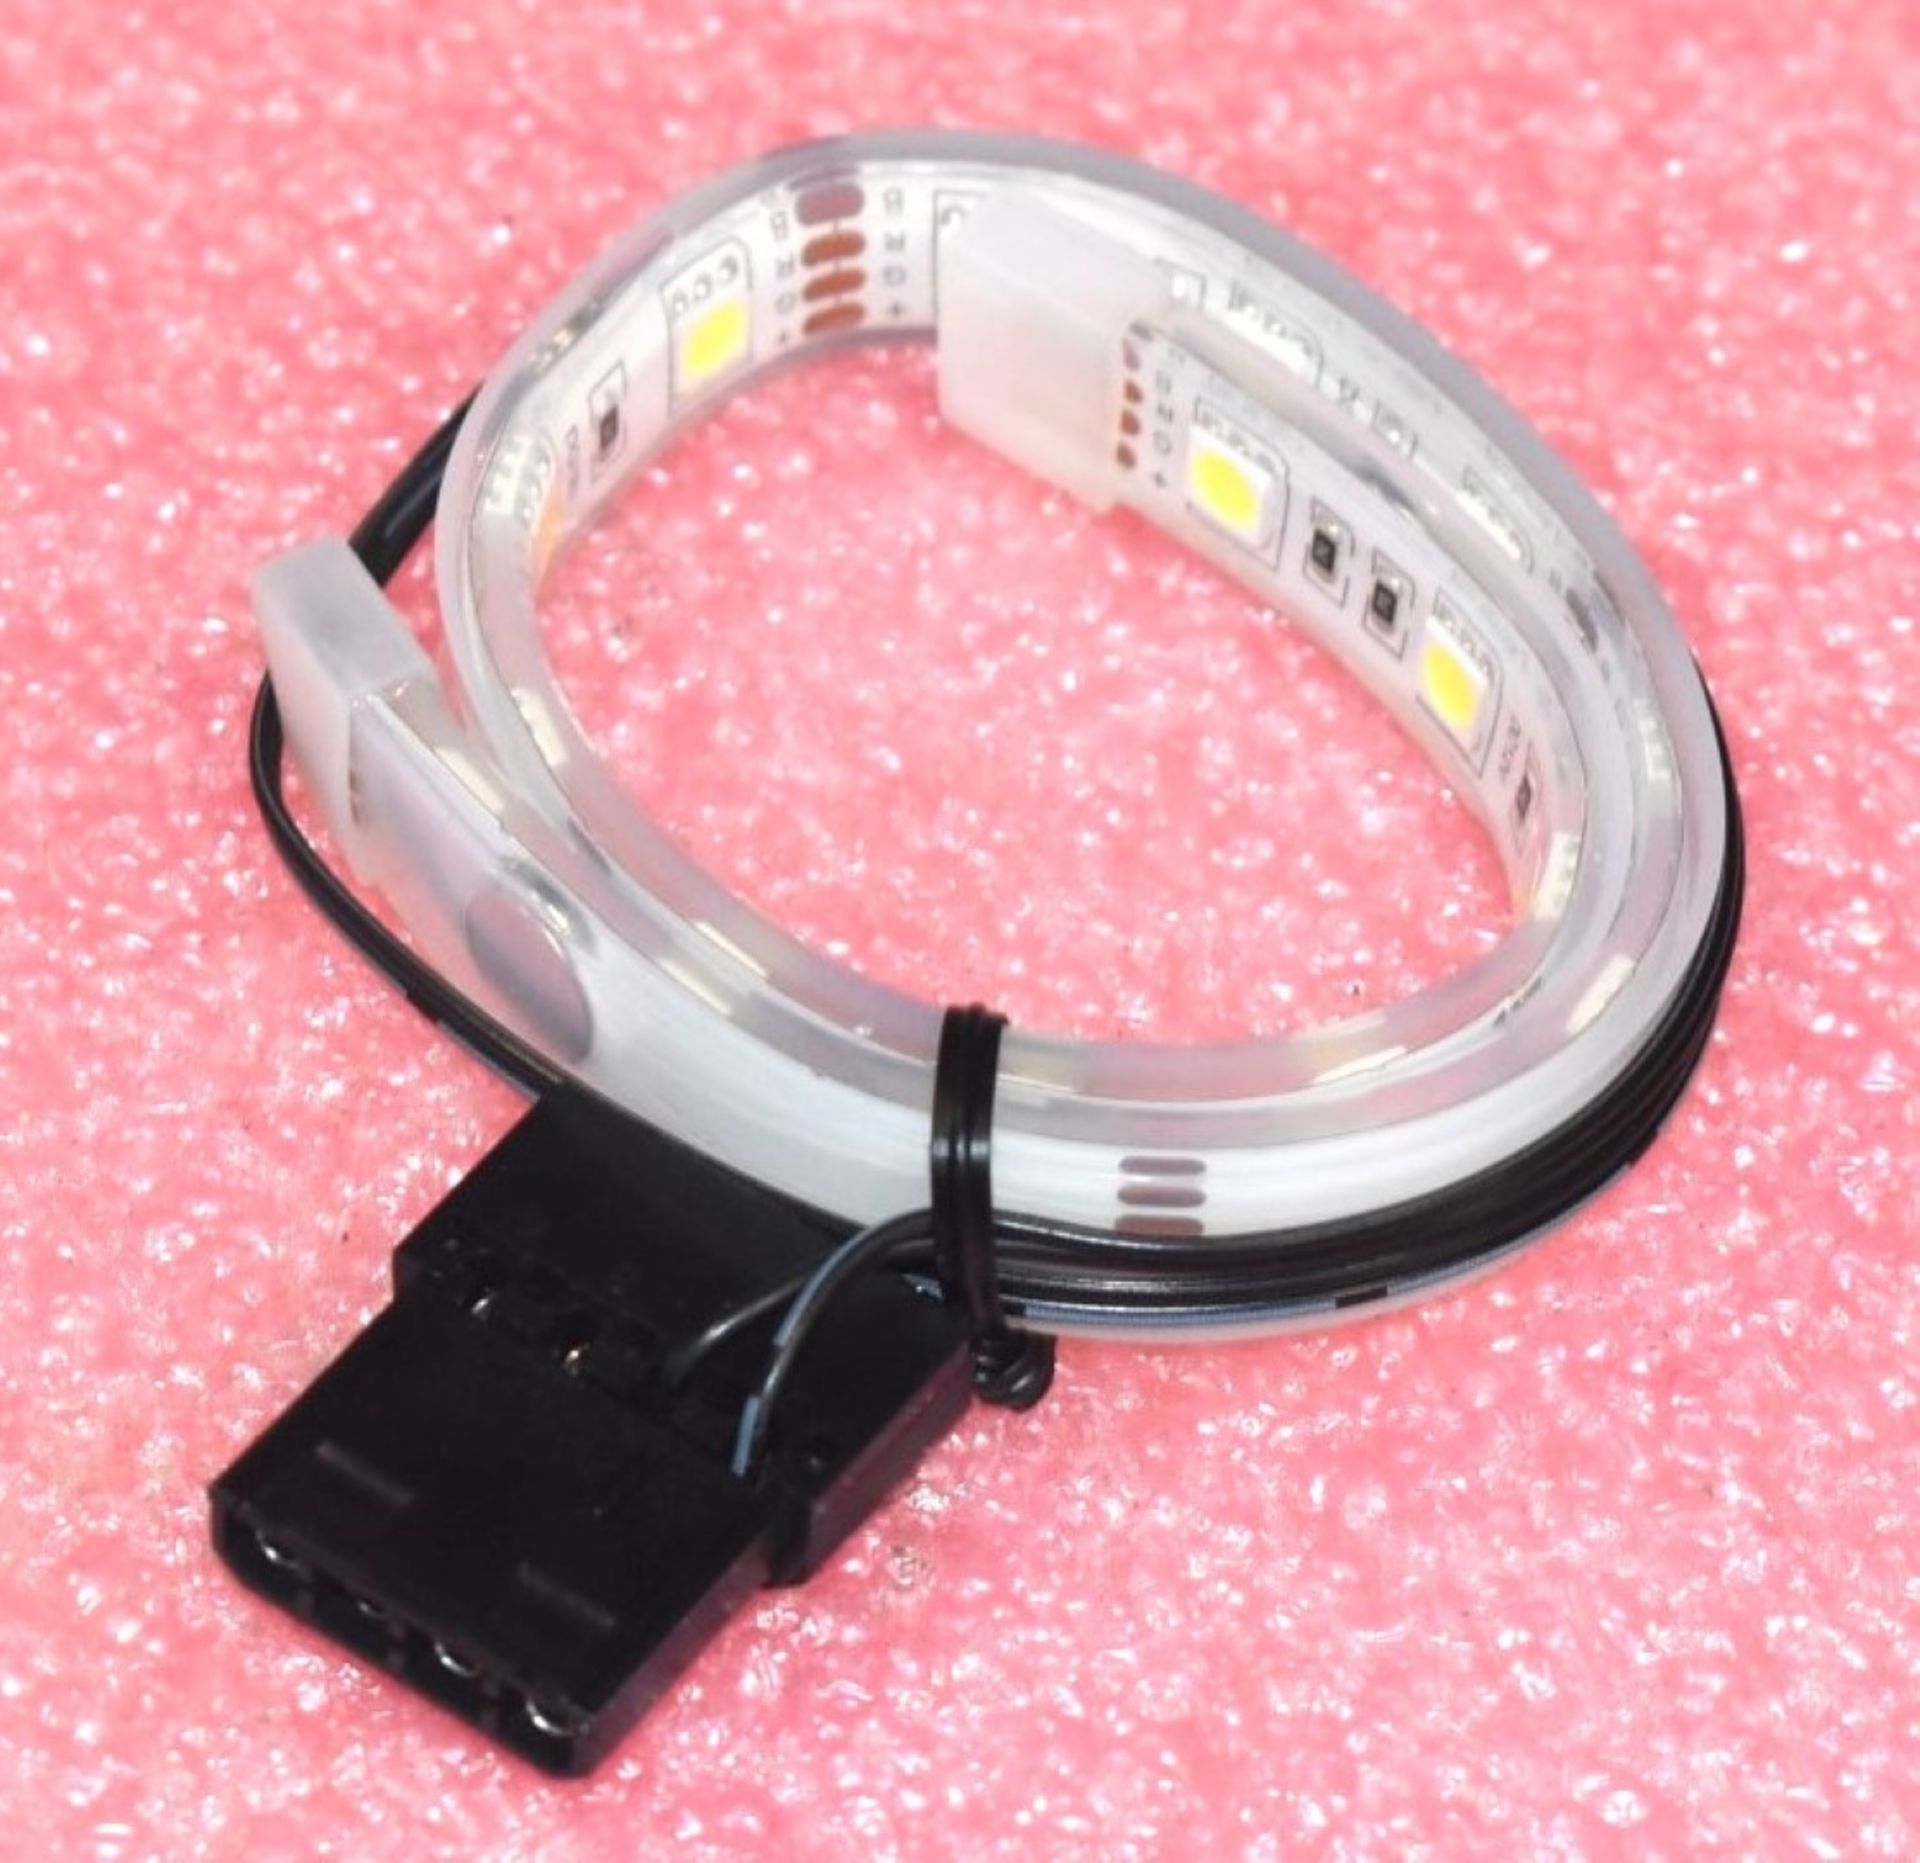 100 x PC Case Illumination 12 Inch LED Strips With Molex Connectors - New Sealed Packets - Image 4 of 5